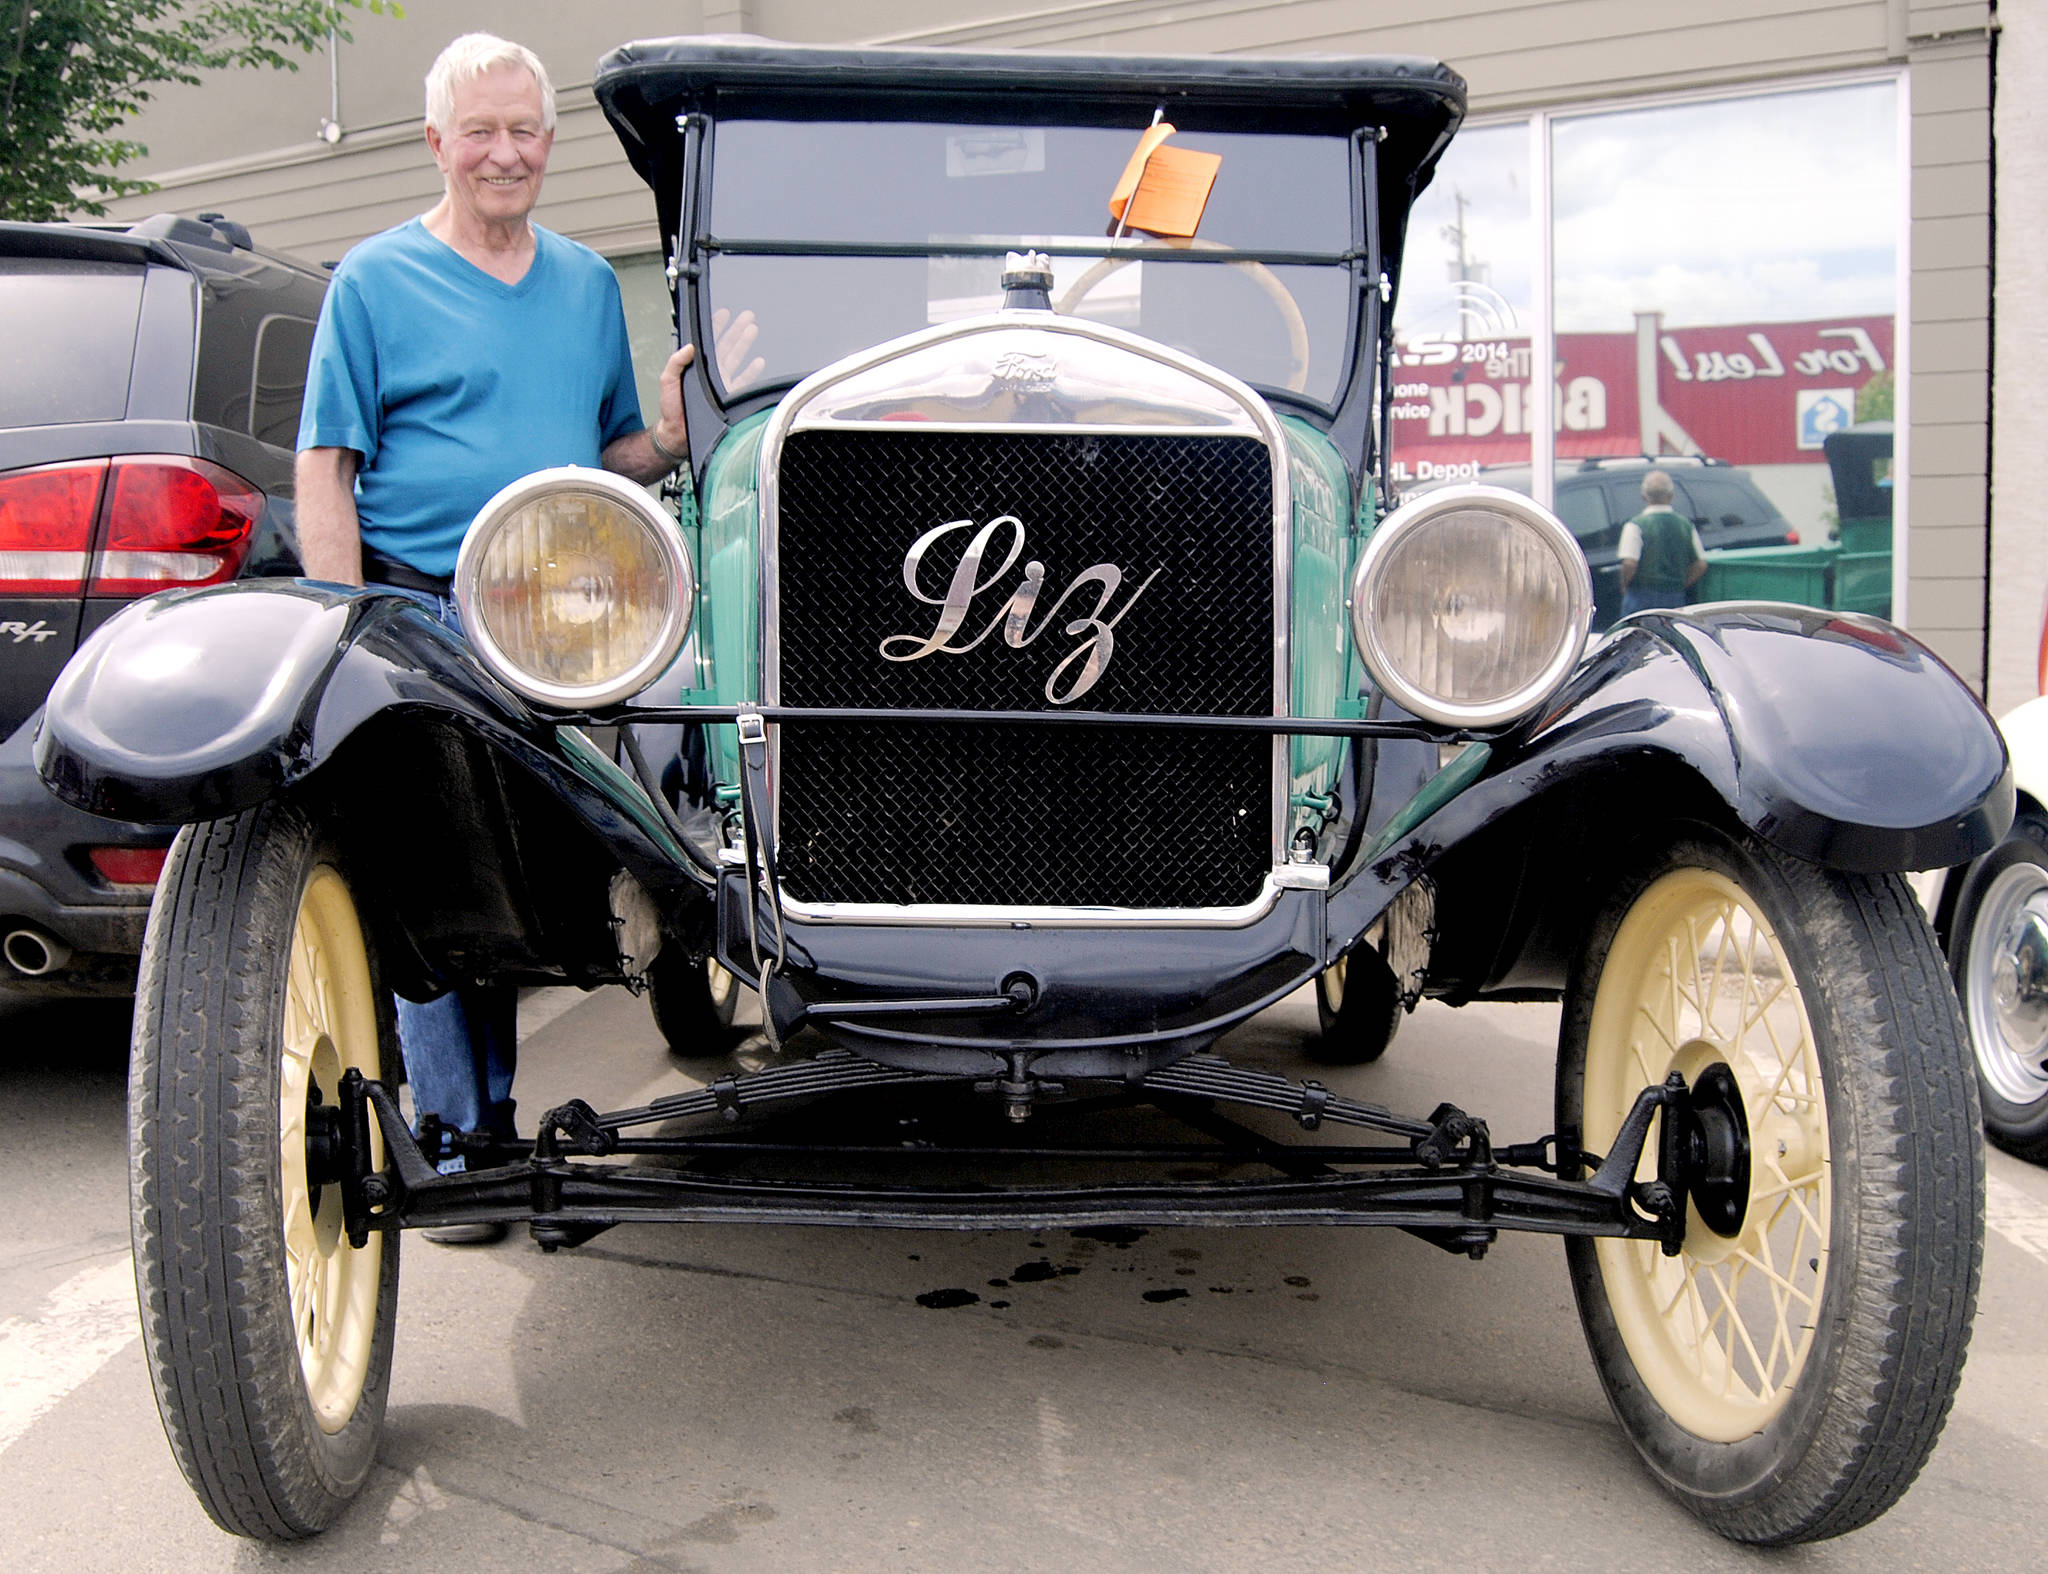 Dave McCourt of Stettler with his Tin Lizzie, 1927 Ford Model T, which he affectionately calls “Liz.” (Lisa Joy/Stettler Independent)